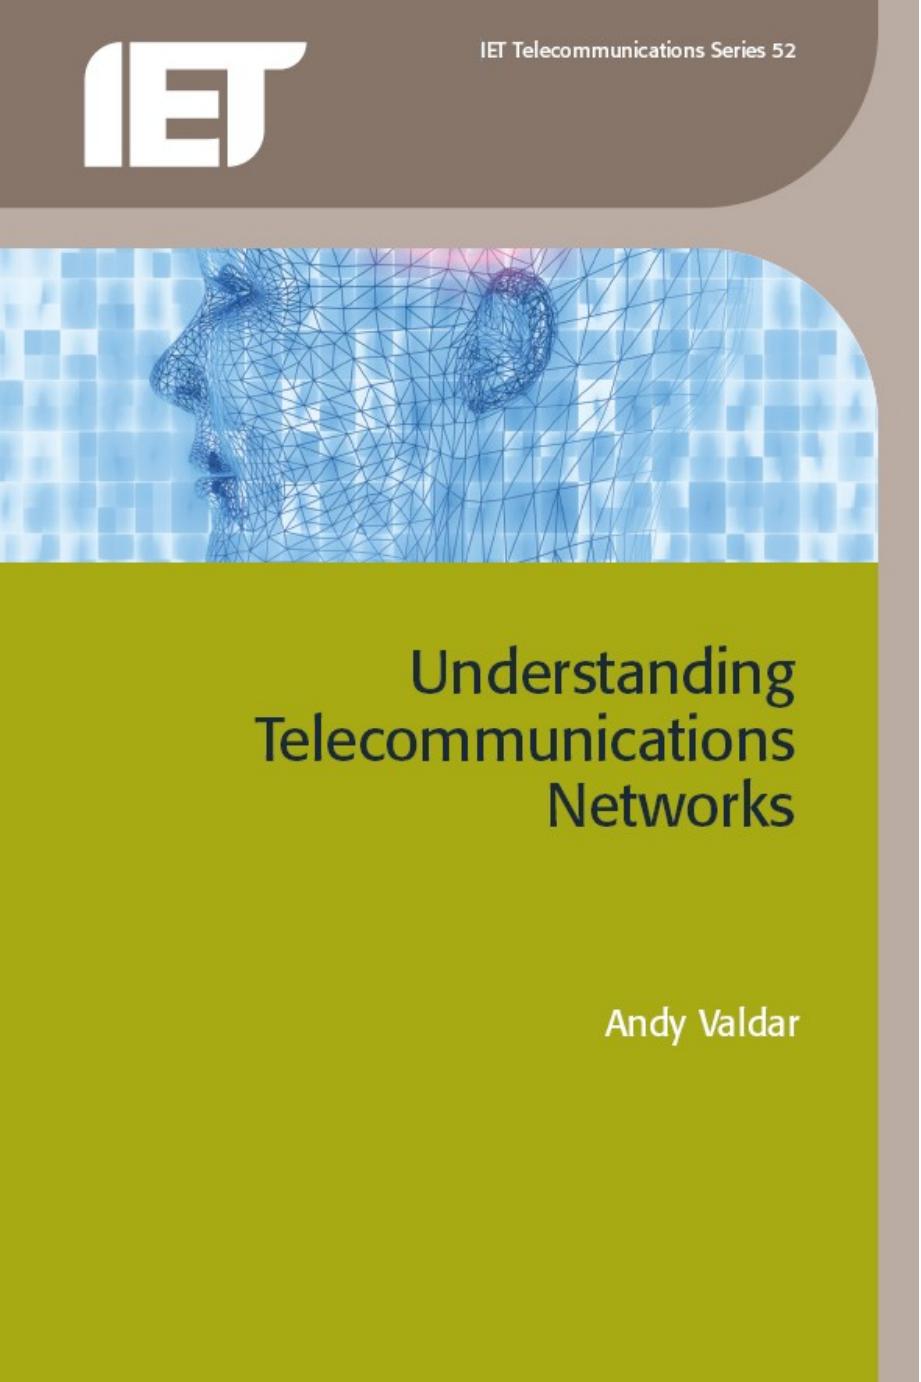 Understanding Telecommunications Networks by Andy Valdar